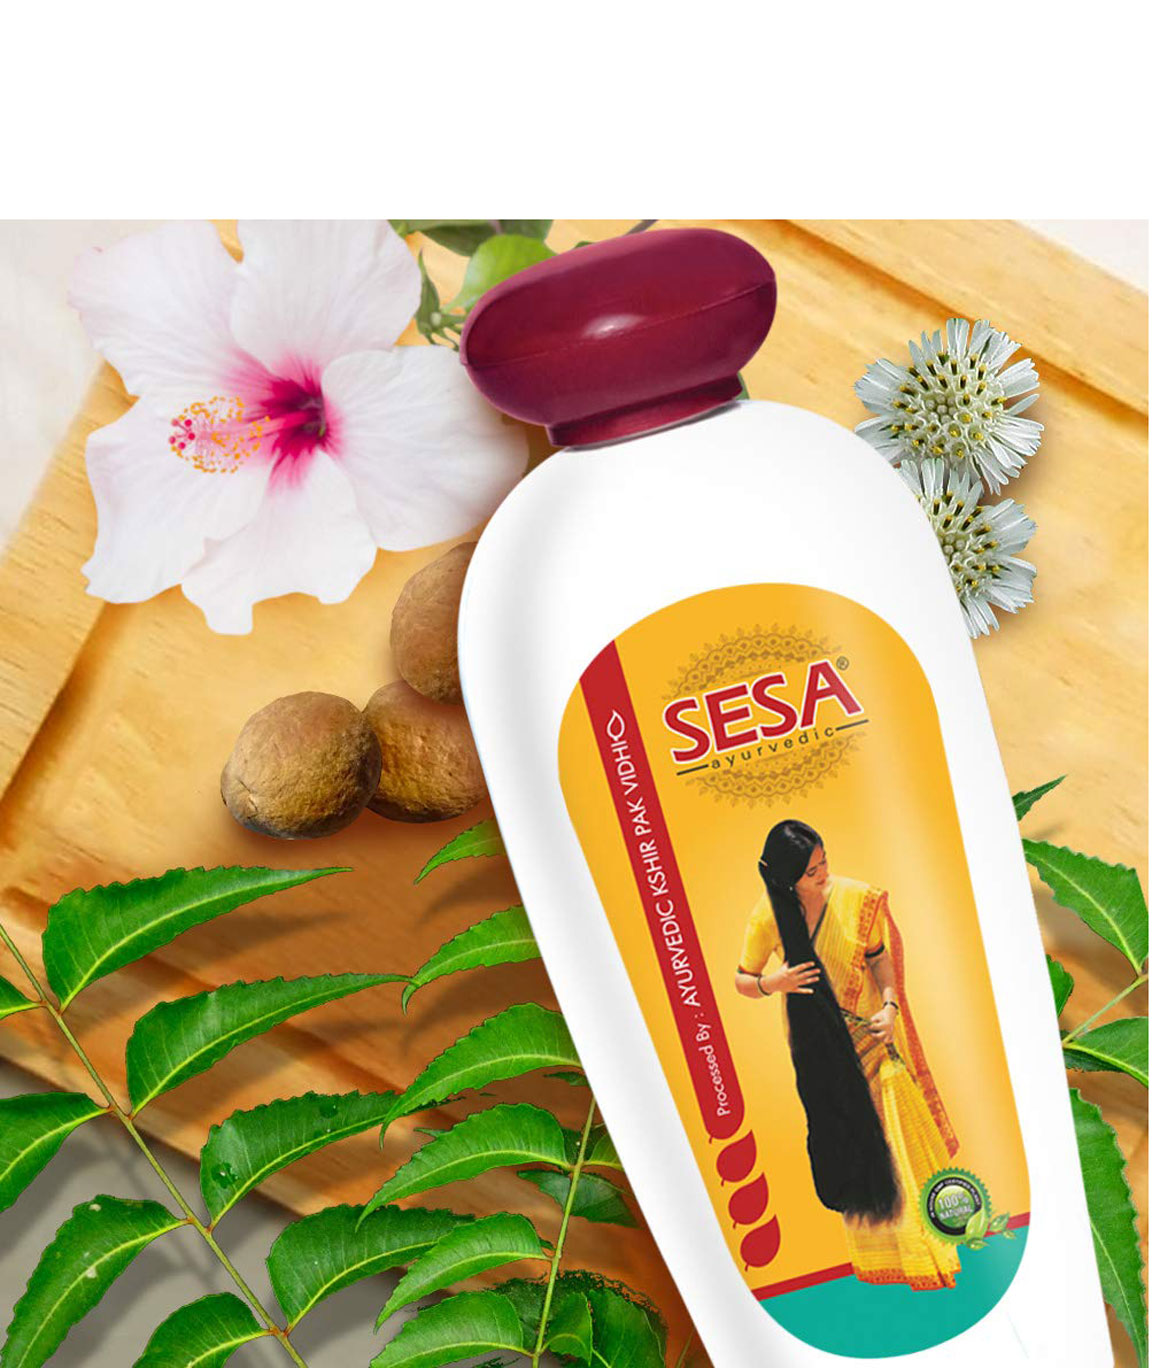 Sesa Hair Oil InLotion 50ml Each Buy combo pack of 2 Tubes at best  price in India  1mg